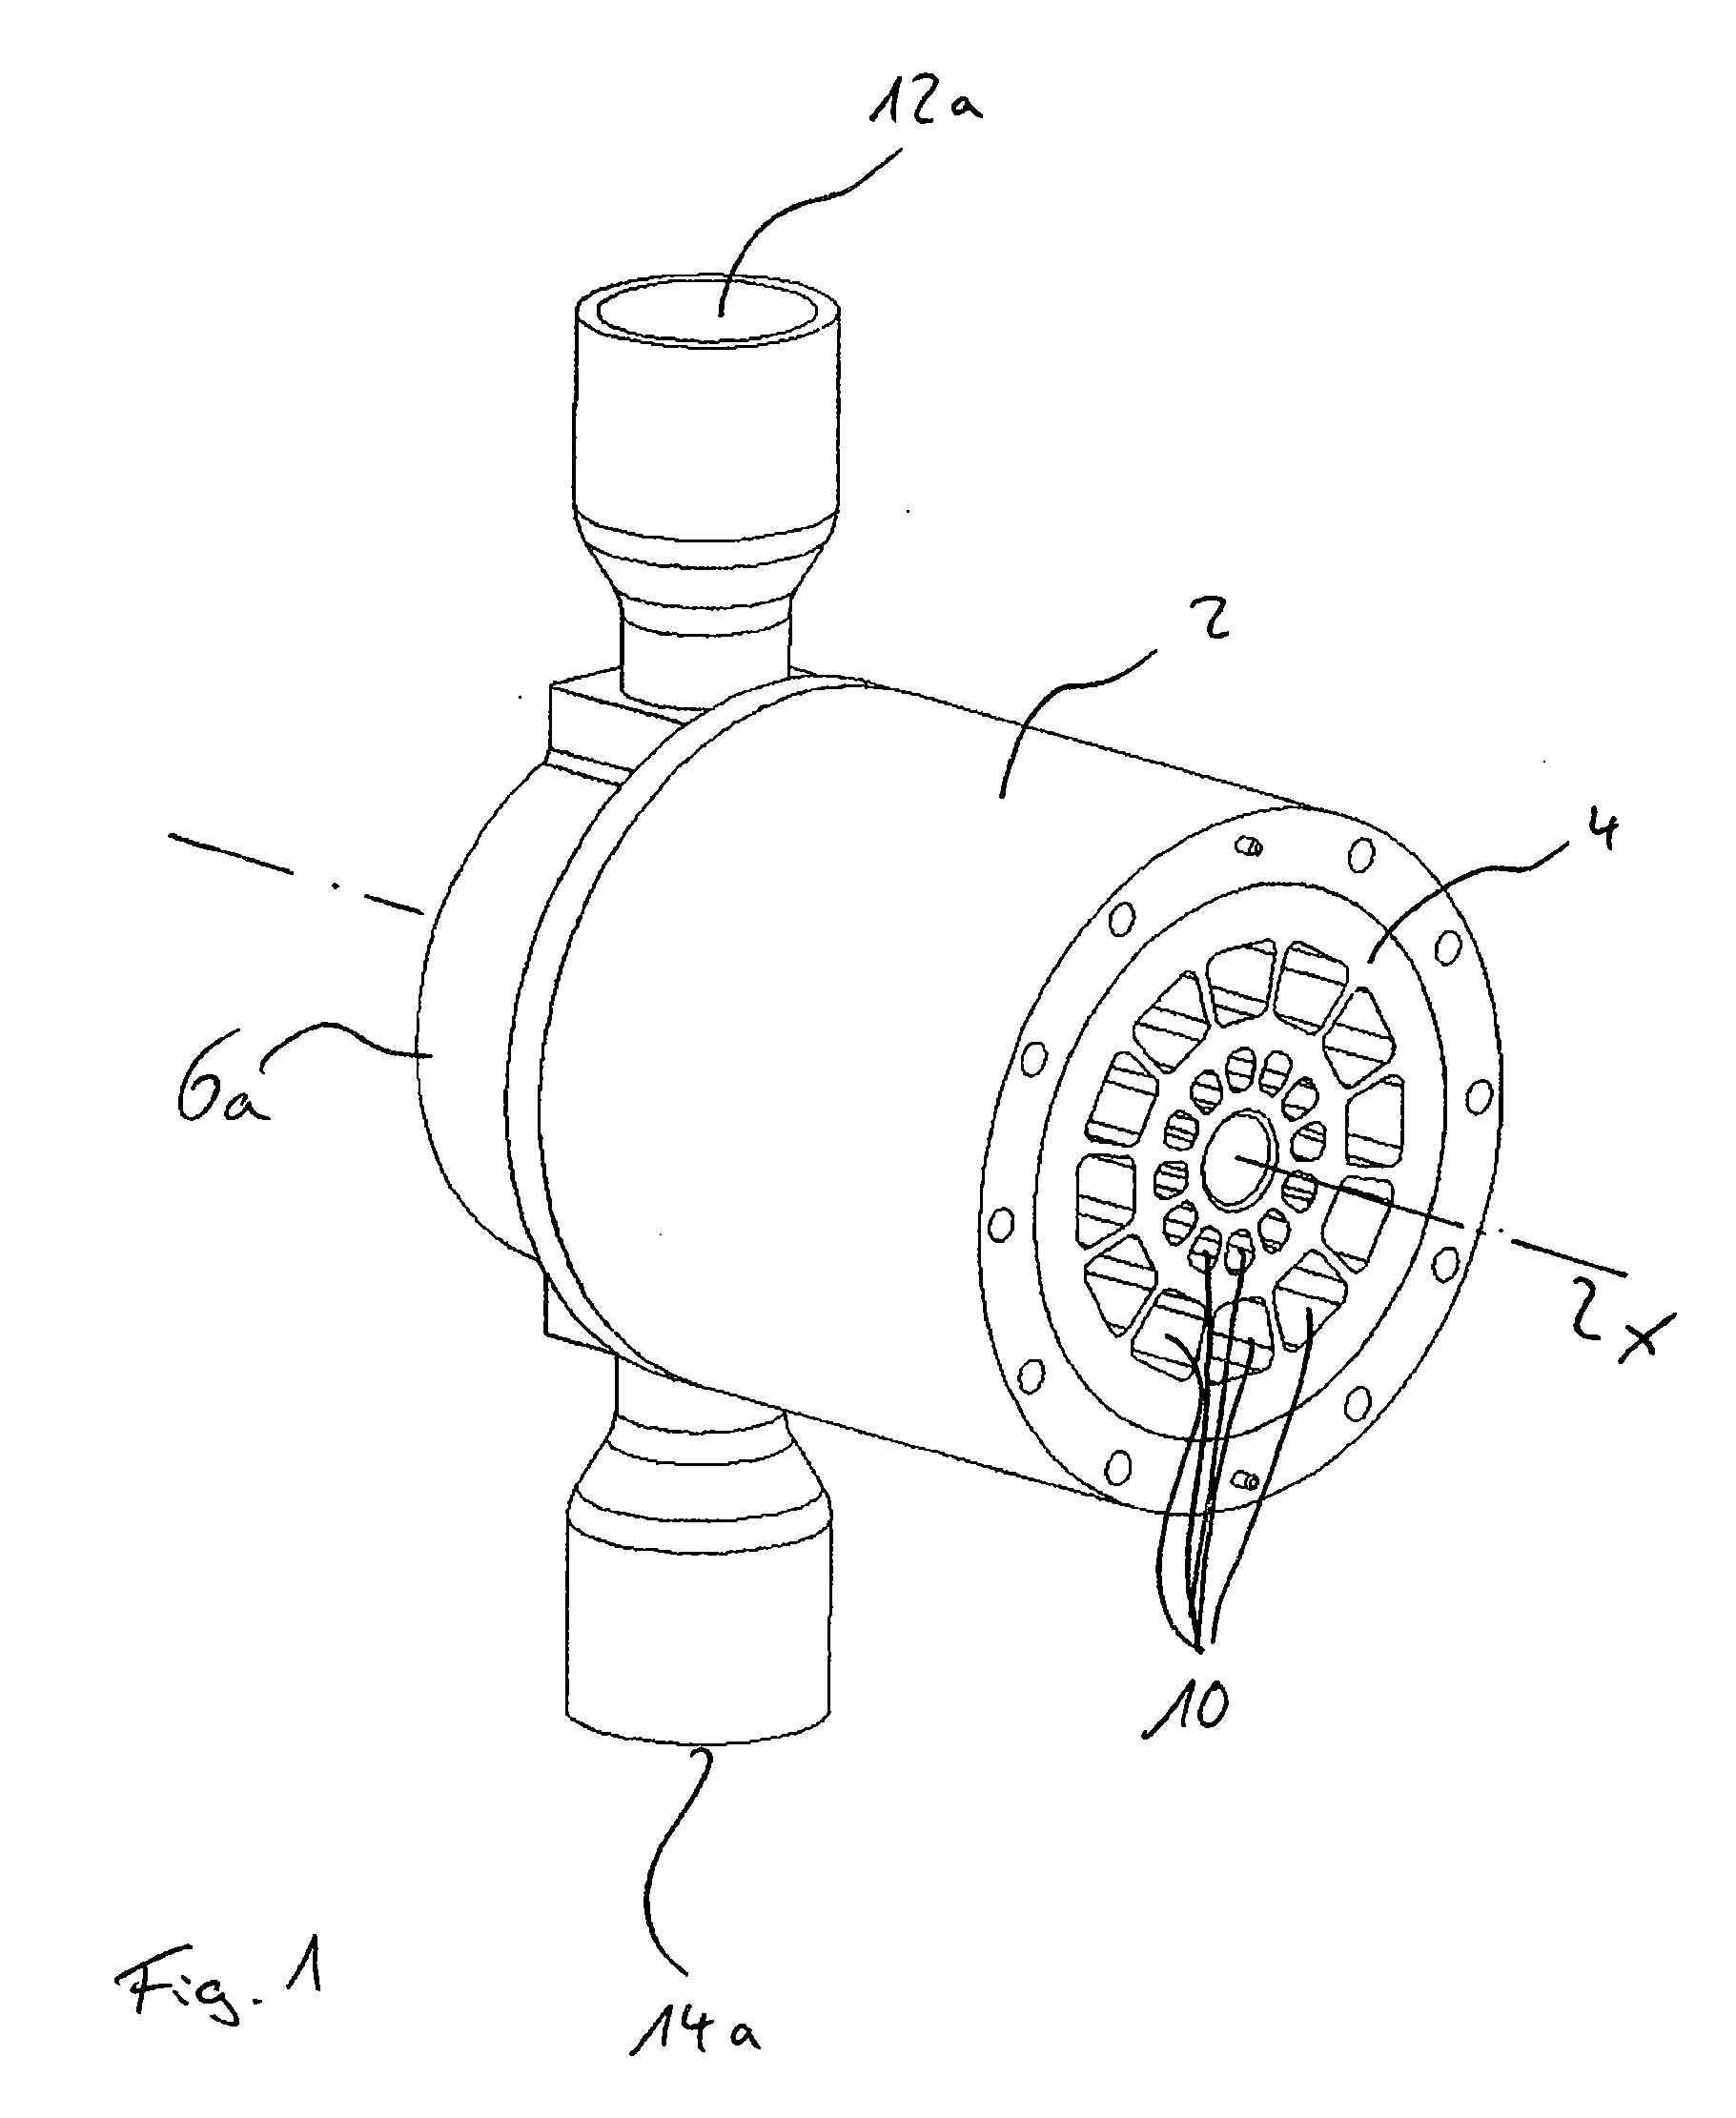 Pressure exchanger for transmitting pressure energy from a first liquid stream to a second liquid stream